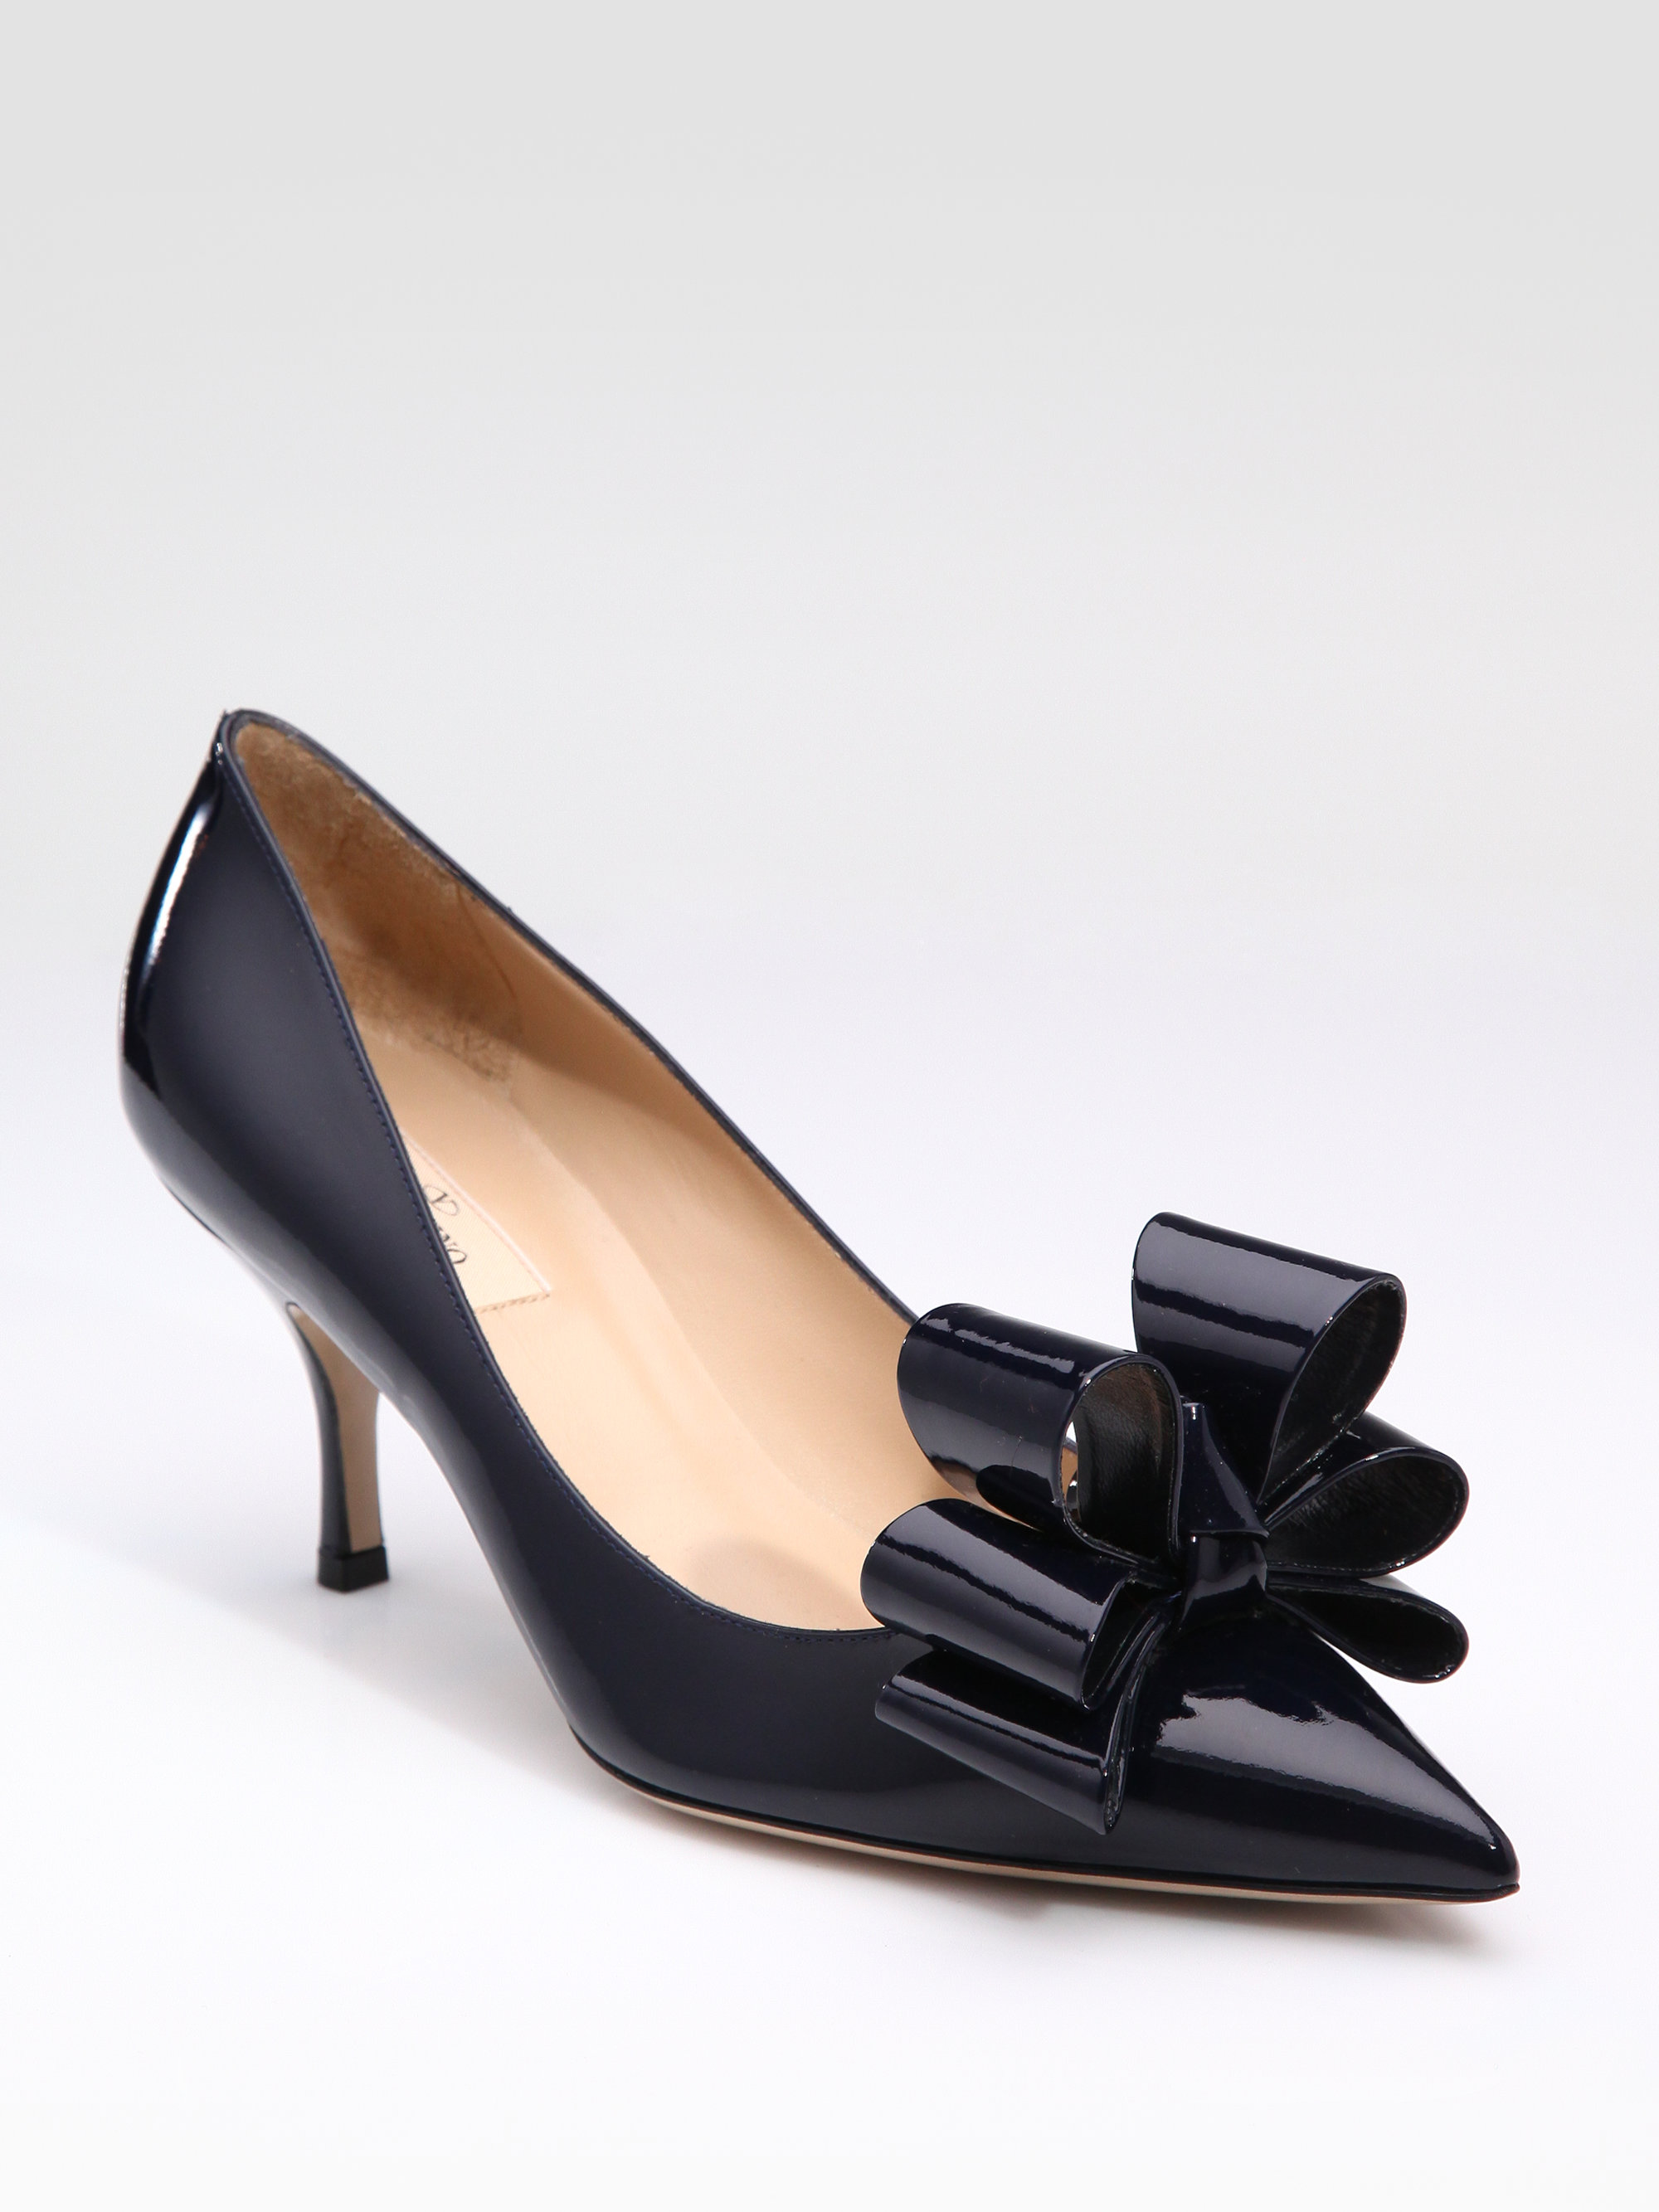 Valentino Versailles Patent Leather Bow Pumps in Black - Lyst